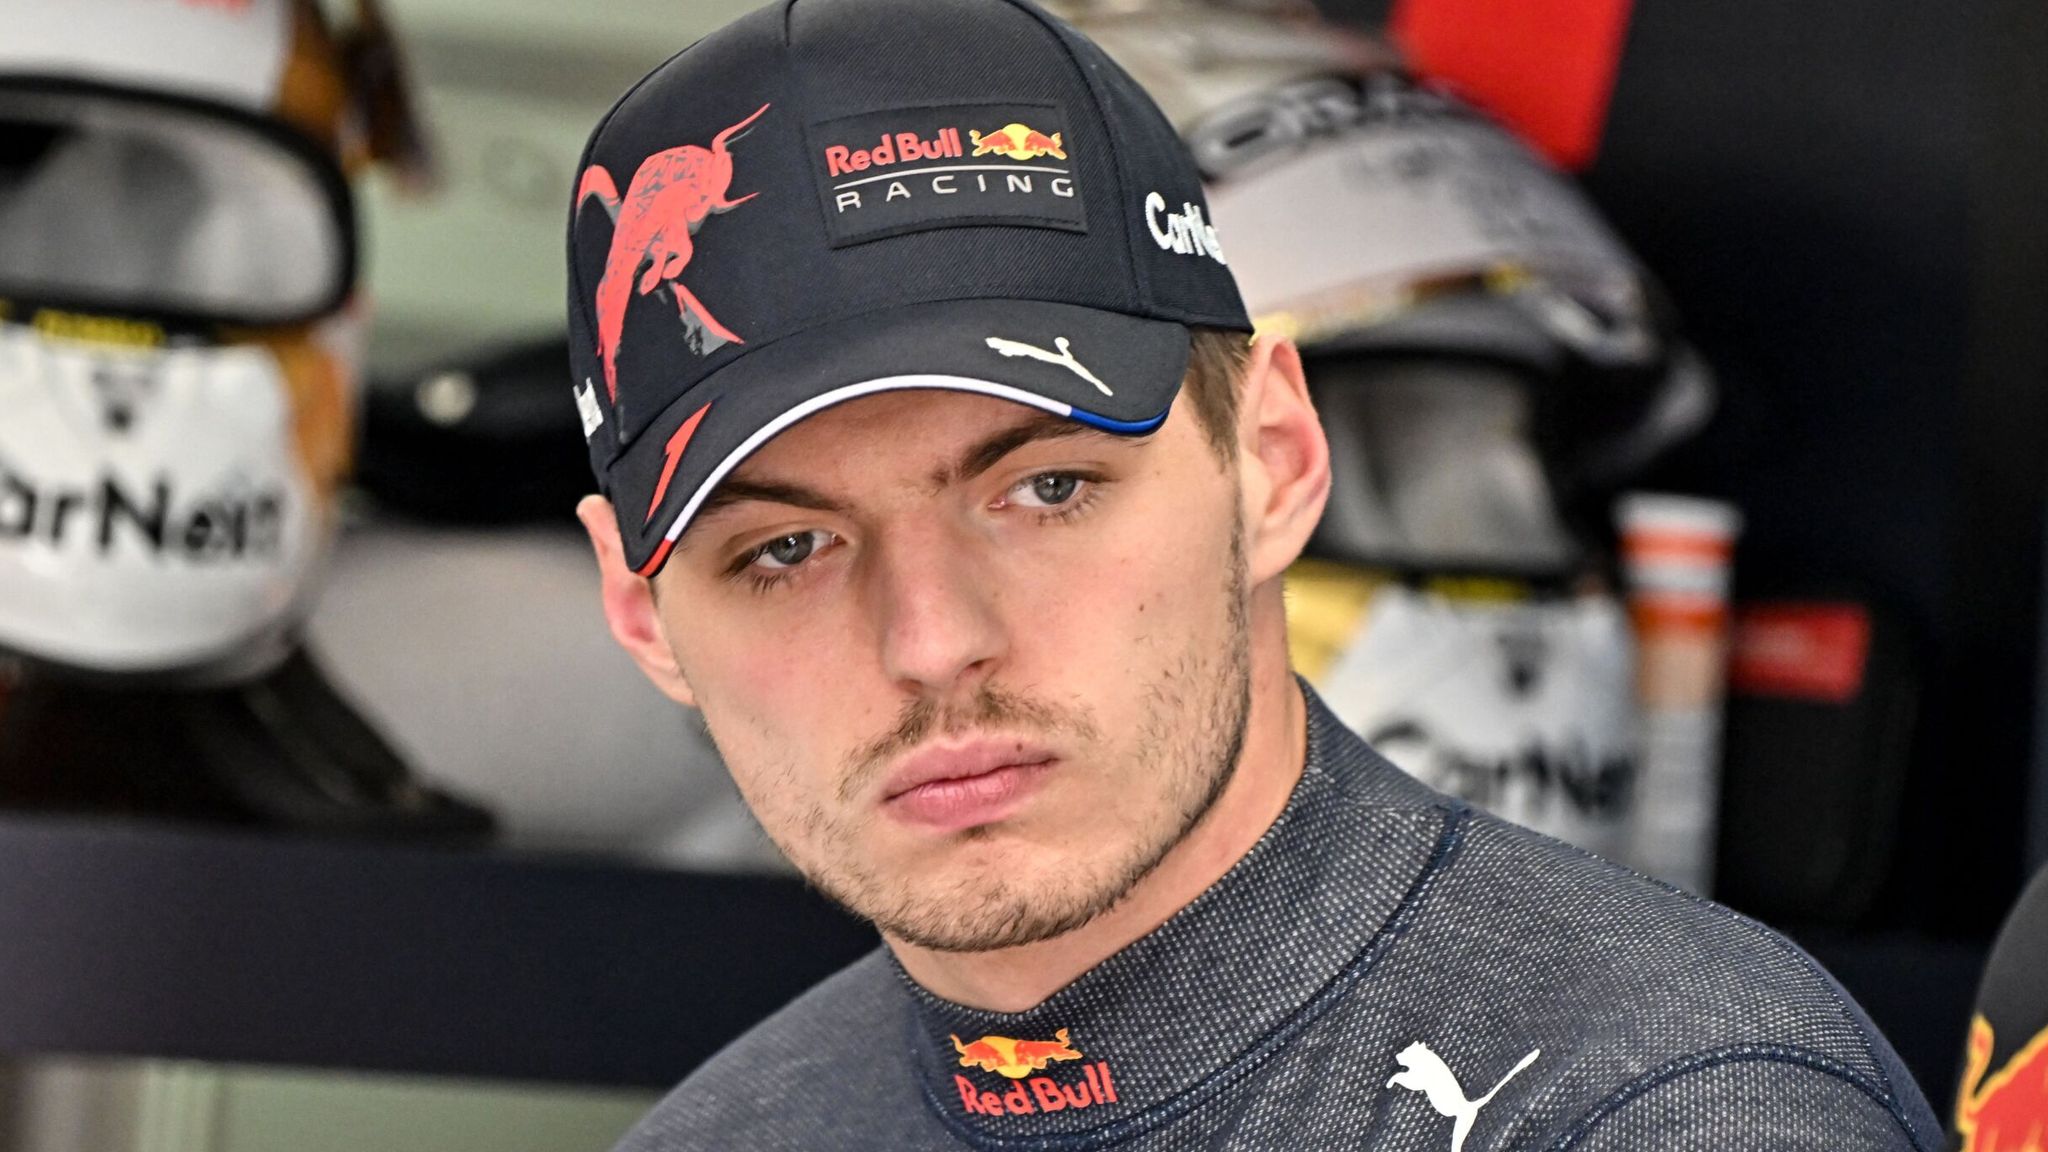 Hungarian GP: Max Verstappen admits Ferrari have pace advantage over Red Bull after Friday F1 News